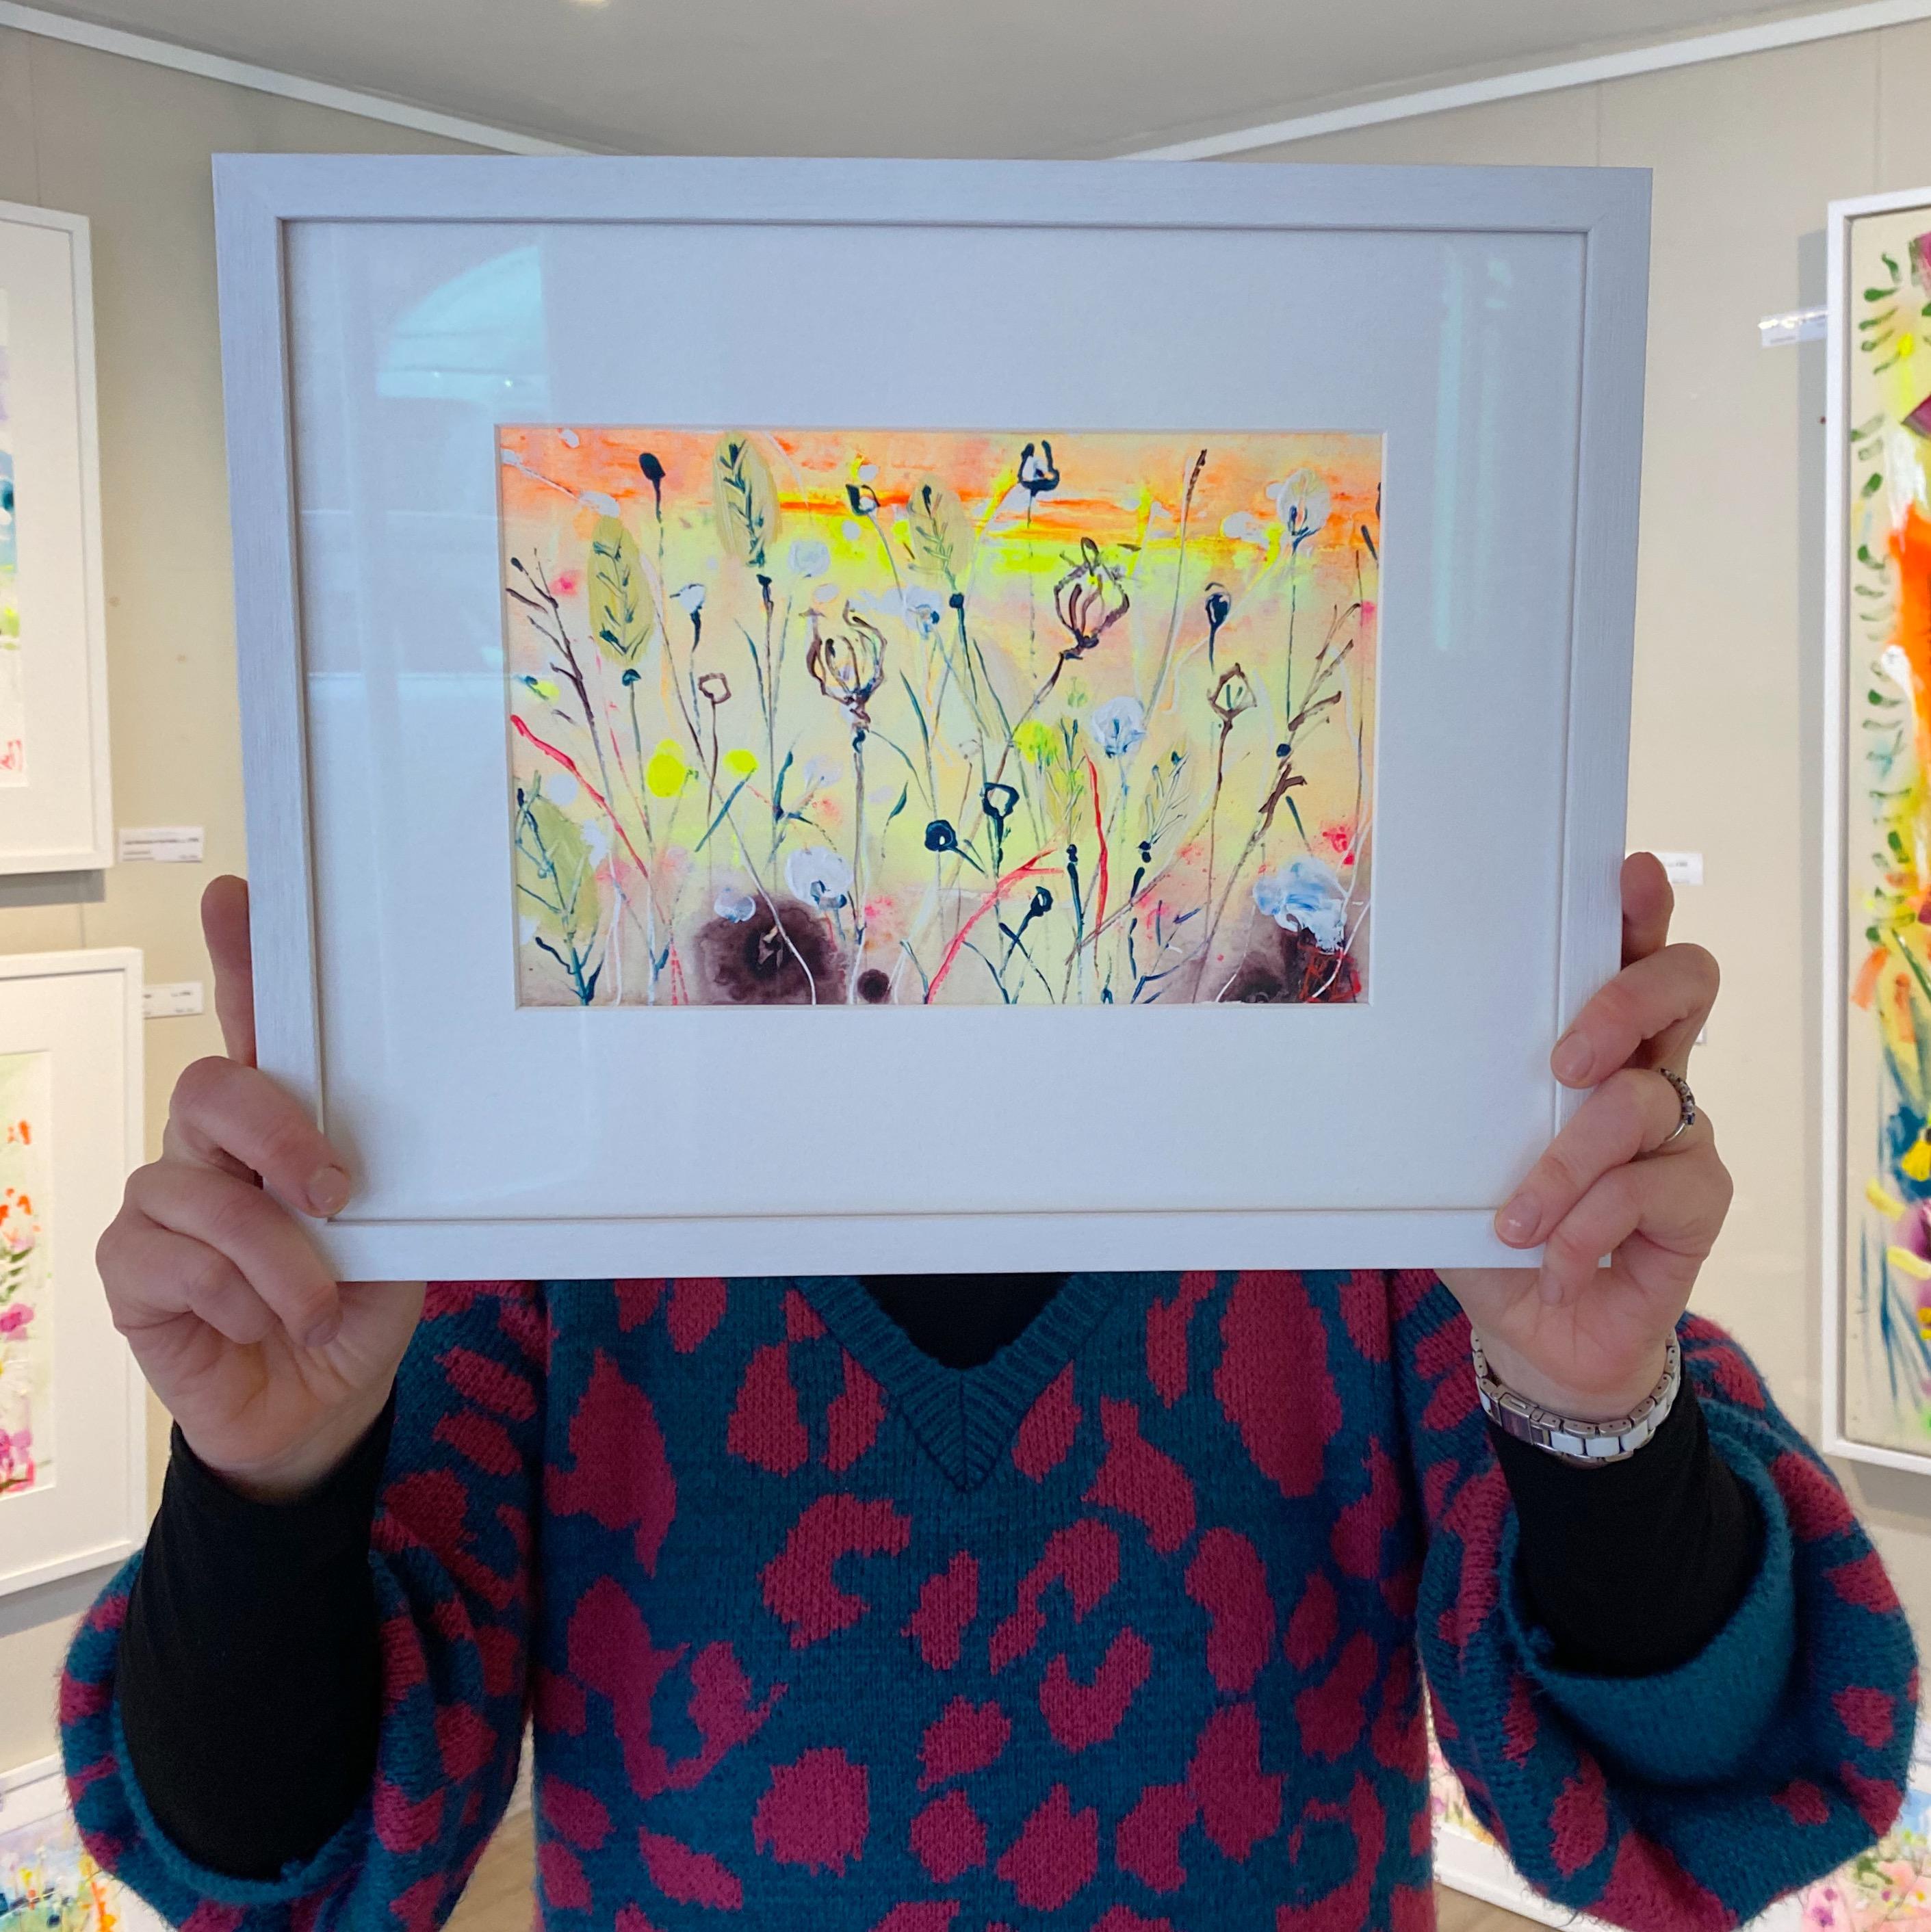  A warm and uplifting artwork based on a summer evening in the british countryside.

Rachael’s works on paper are particularly organic.  Diluted paint is allowed to migrate on a damp surface, sticks are used to daub and scratch,  heavier splatters